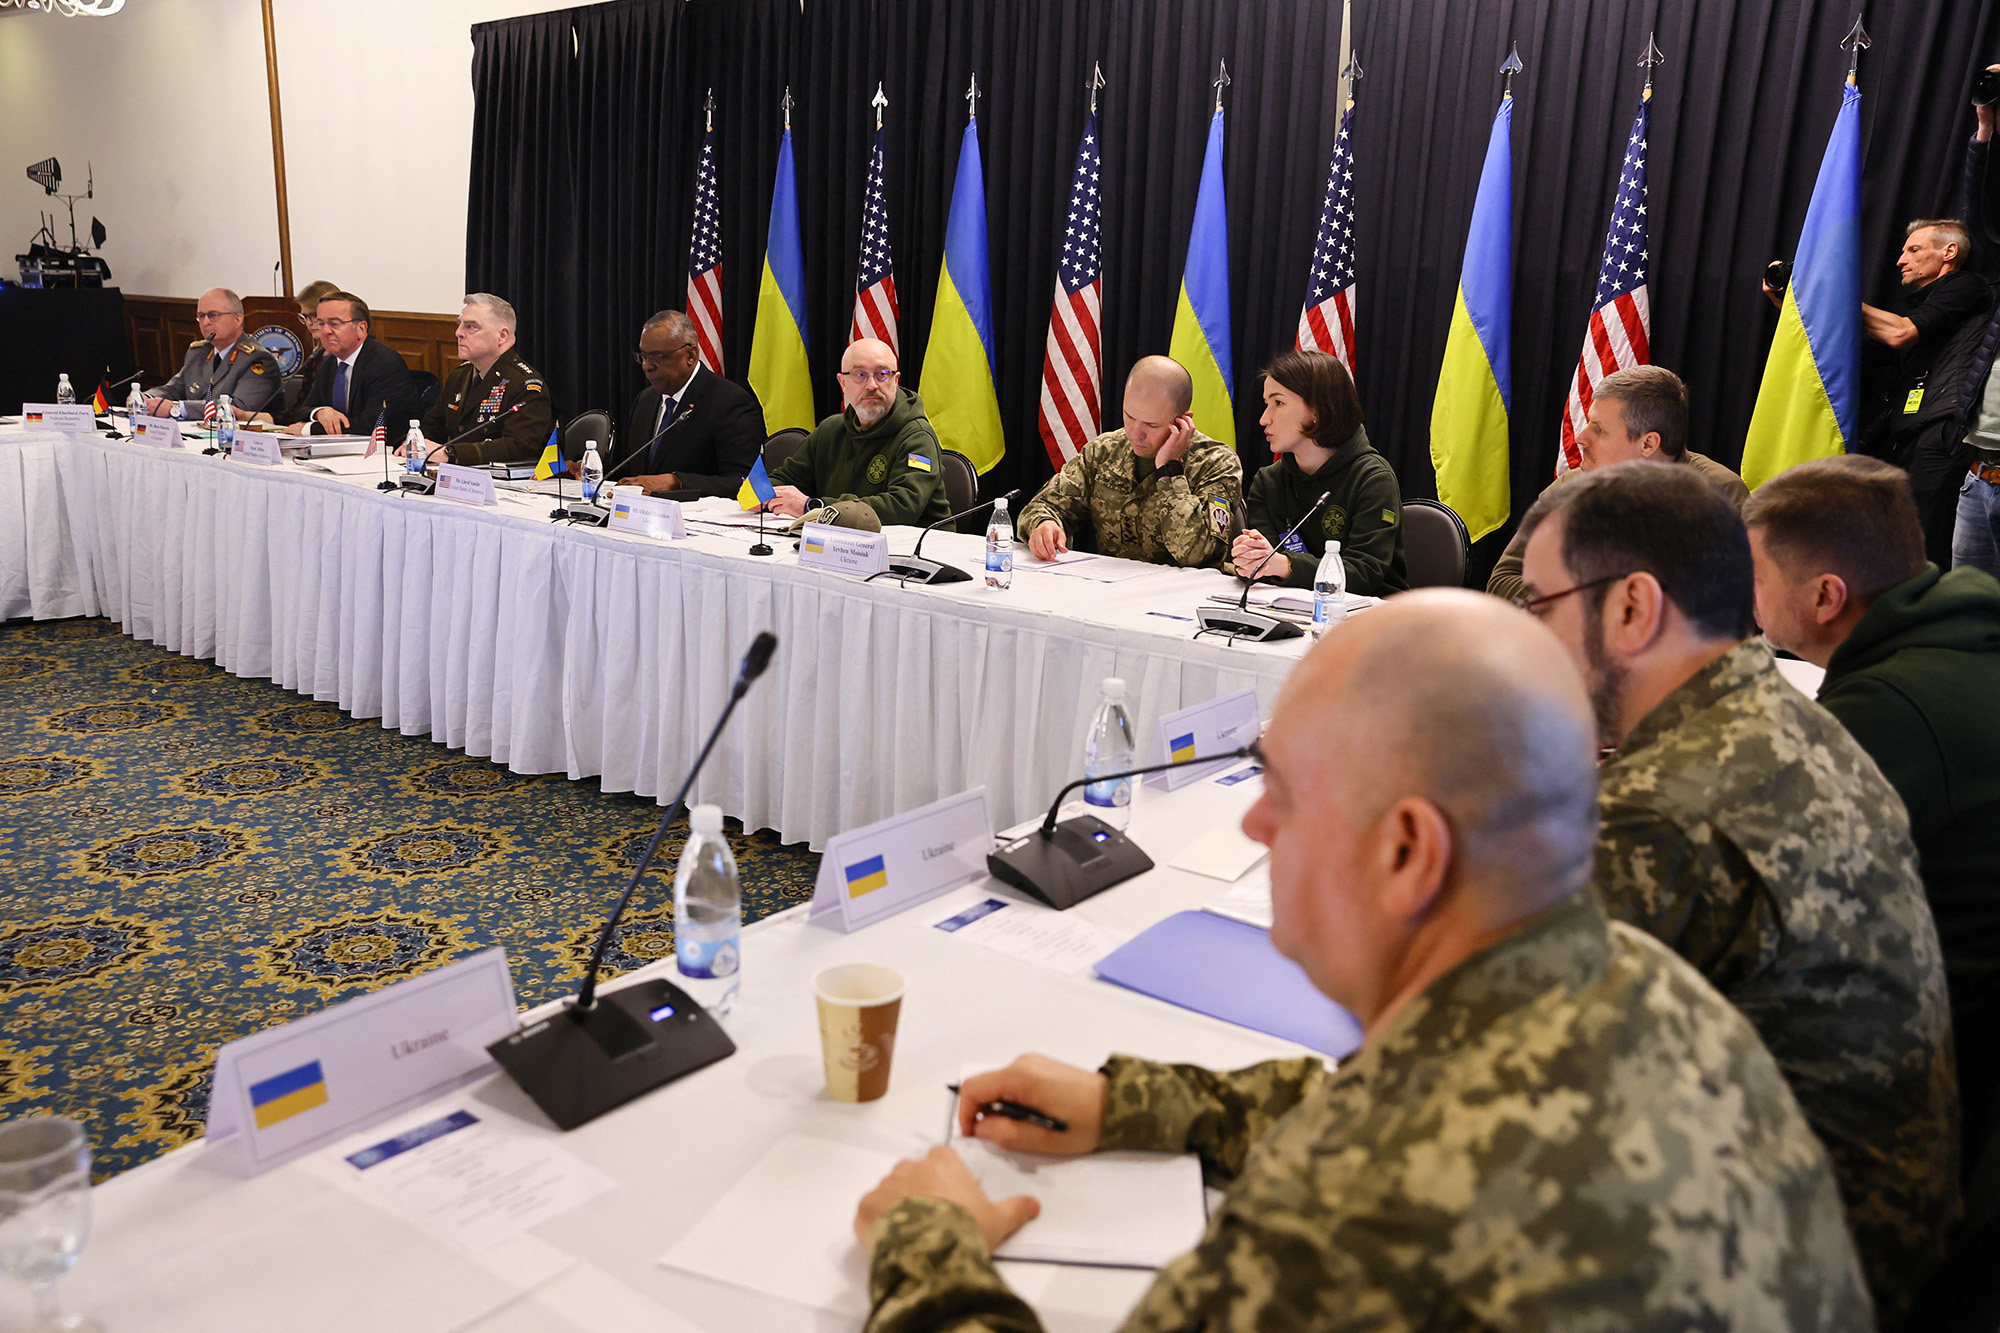 German Defence Minister Boris Pistorius, second left, meets with his U.S. counterpart, Secretary of Defense Lloyd Austin, fourth left, Ukraine's Defense Minister Oleksii Reznikov, fifth left, and U.S. Chairman of the Joint Chiefs of Staff Gen. Mark A. Milley, third left, to discuss how to help Ukraine defend itself, at Ramstein Air Base, Germany, on January 20.